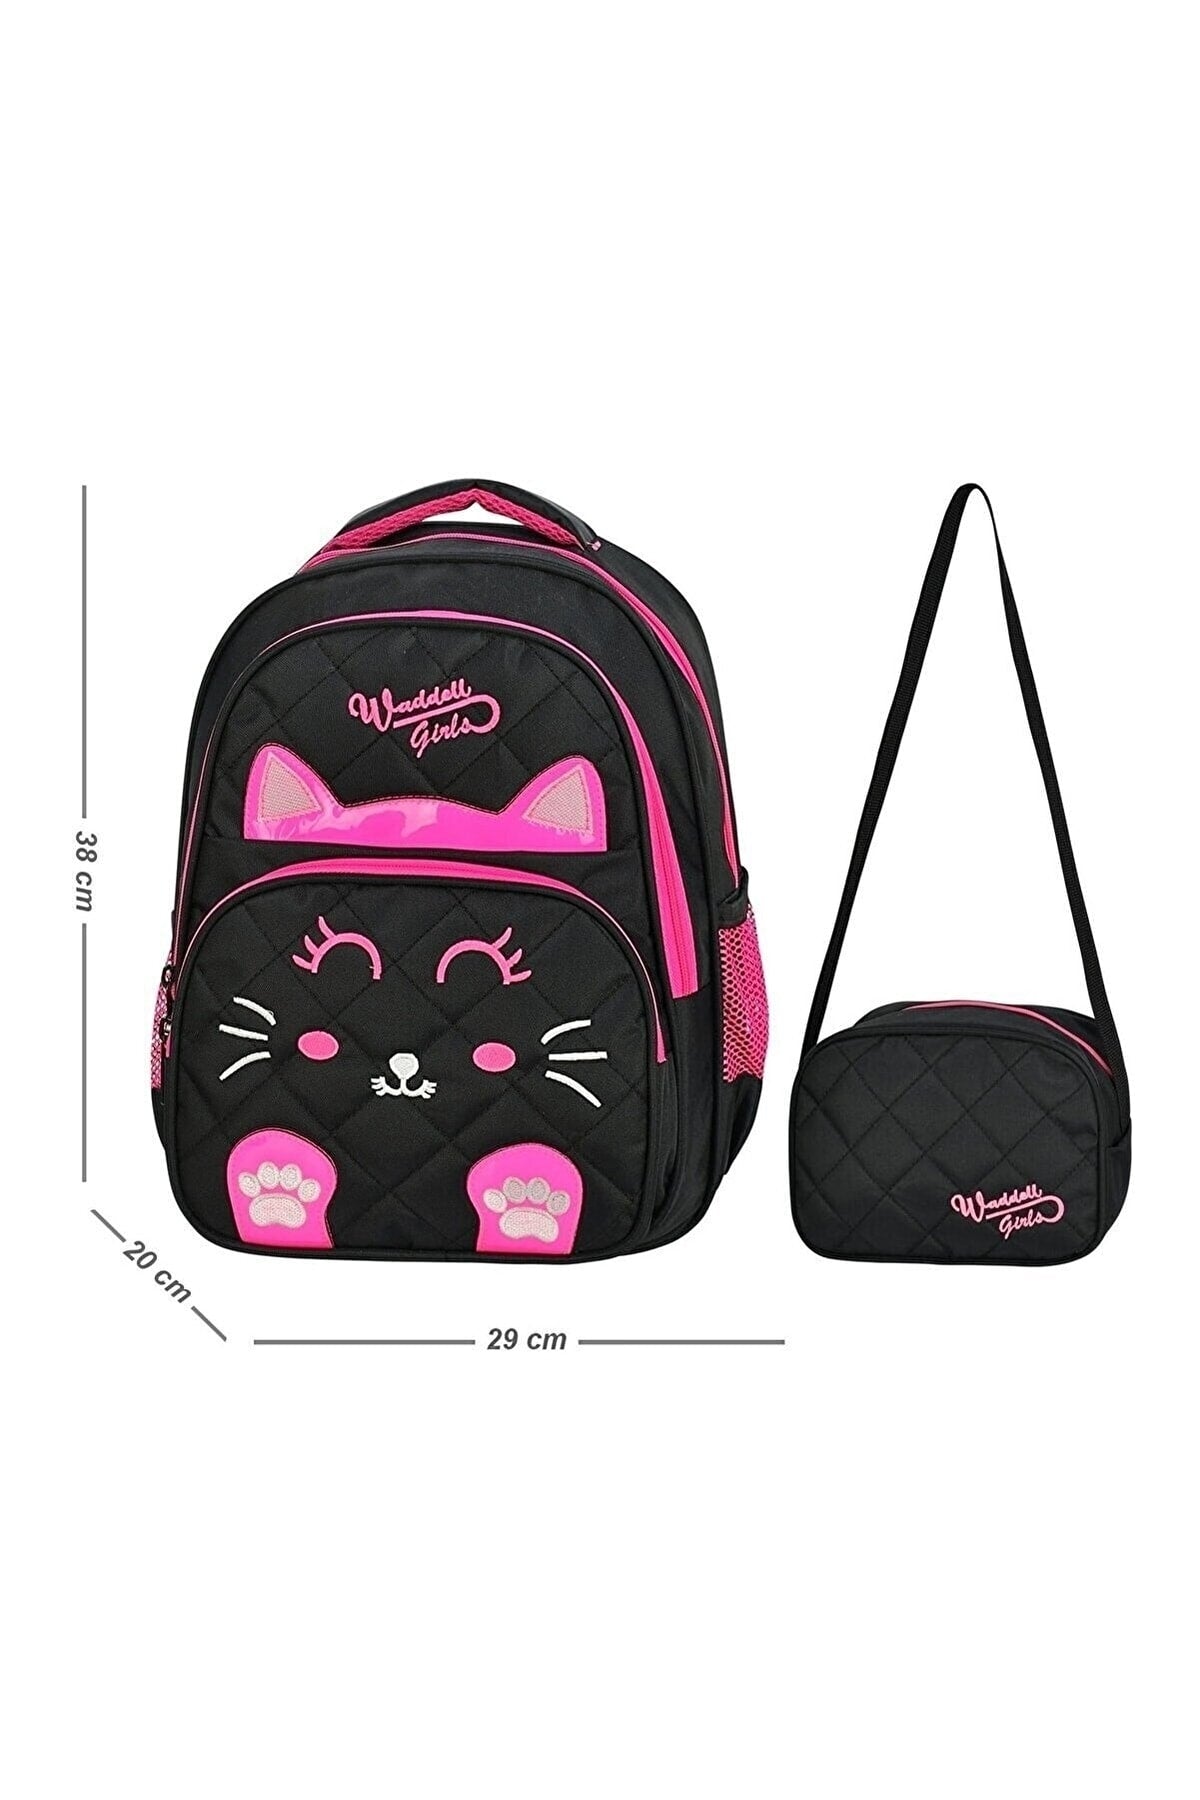 Licensed Quilted Cat Patterned Primary School Bag And Lunch Box